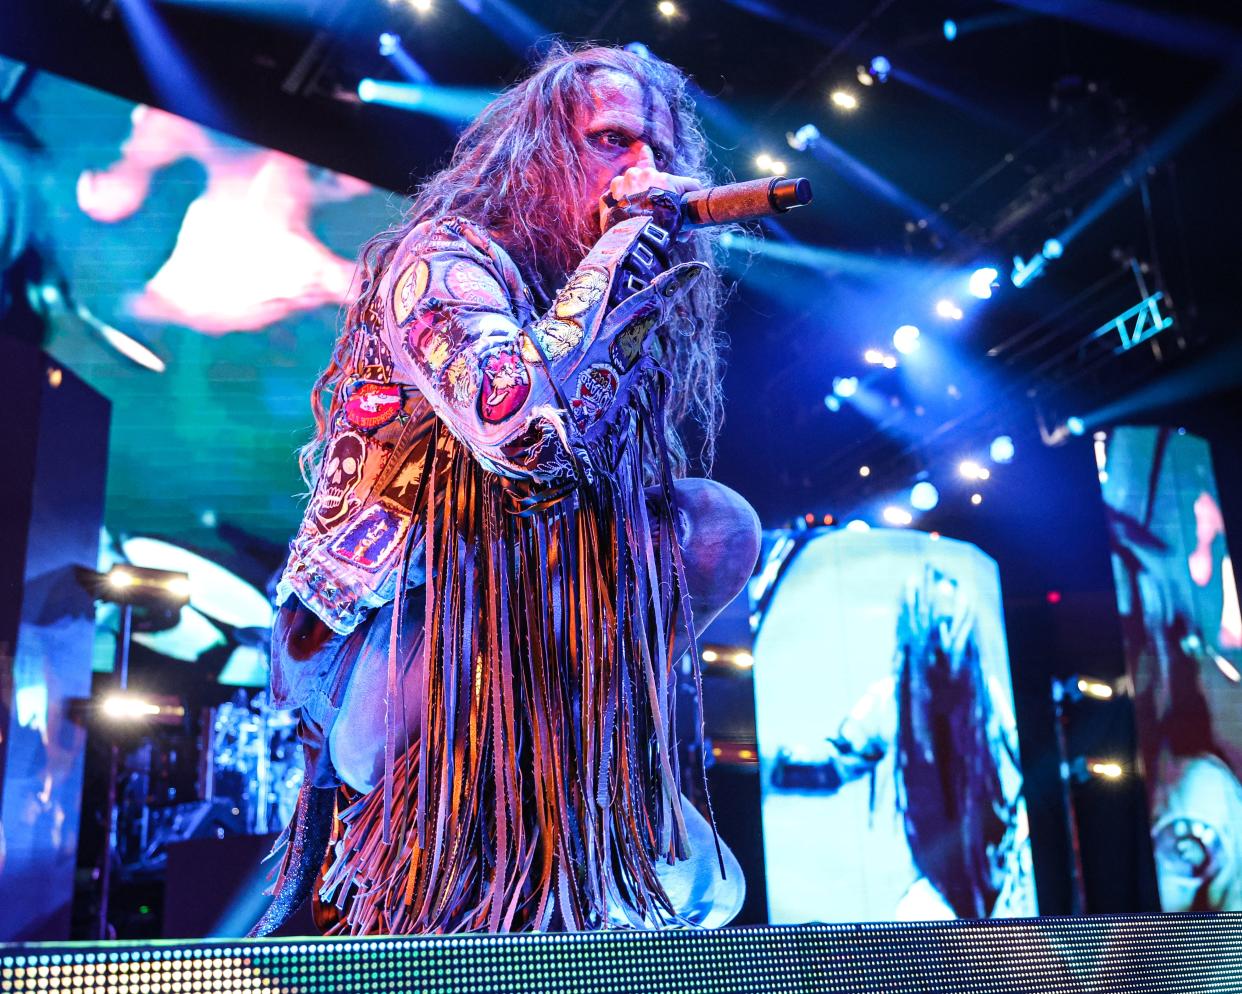 Rob Zombie will co-headline the American Family Insurance Amphitheater with Alice Cooper Aug. 27.